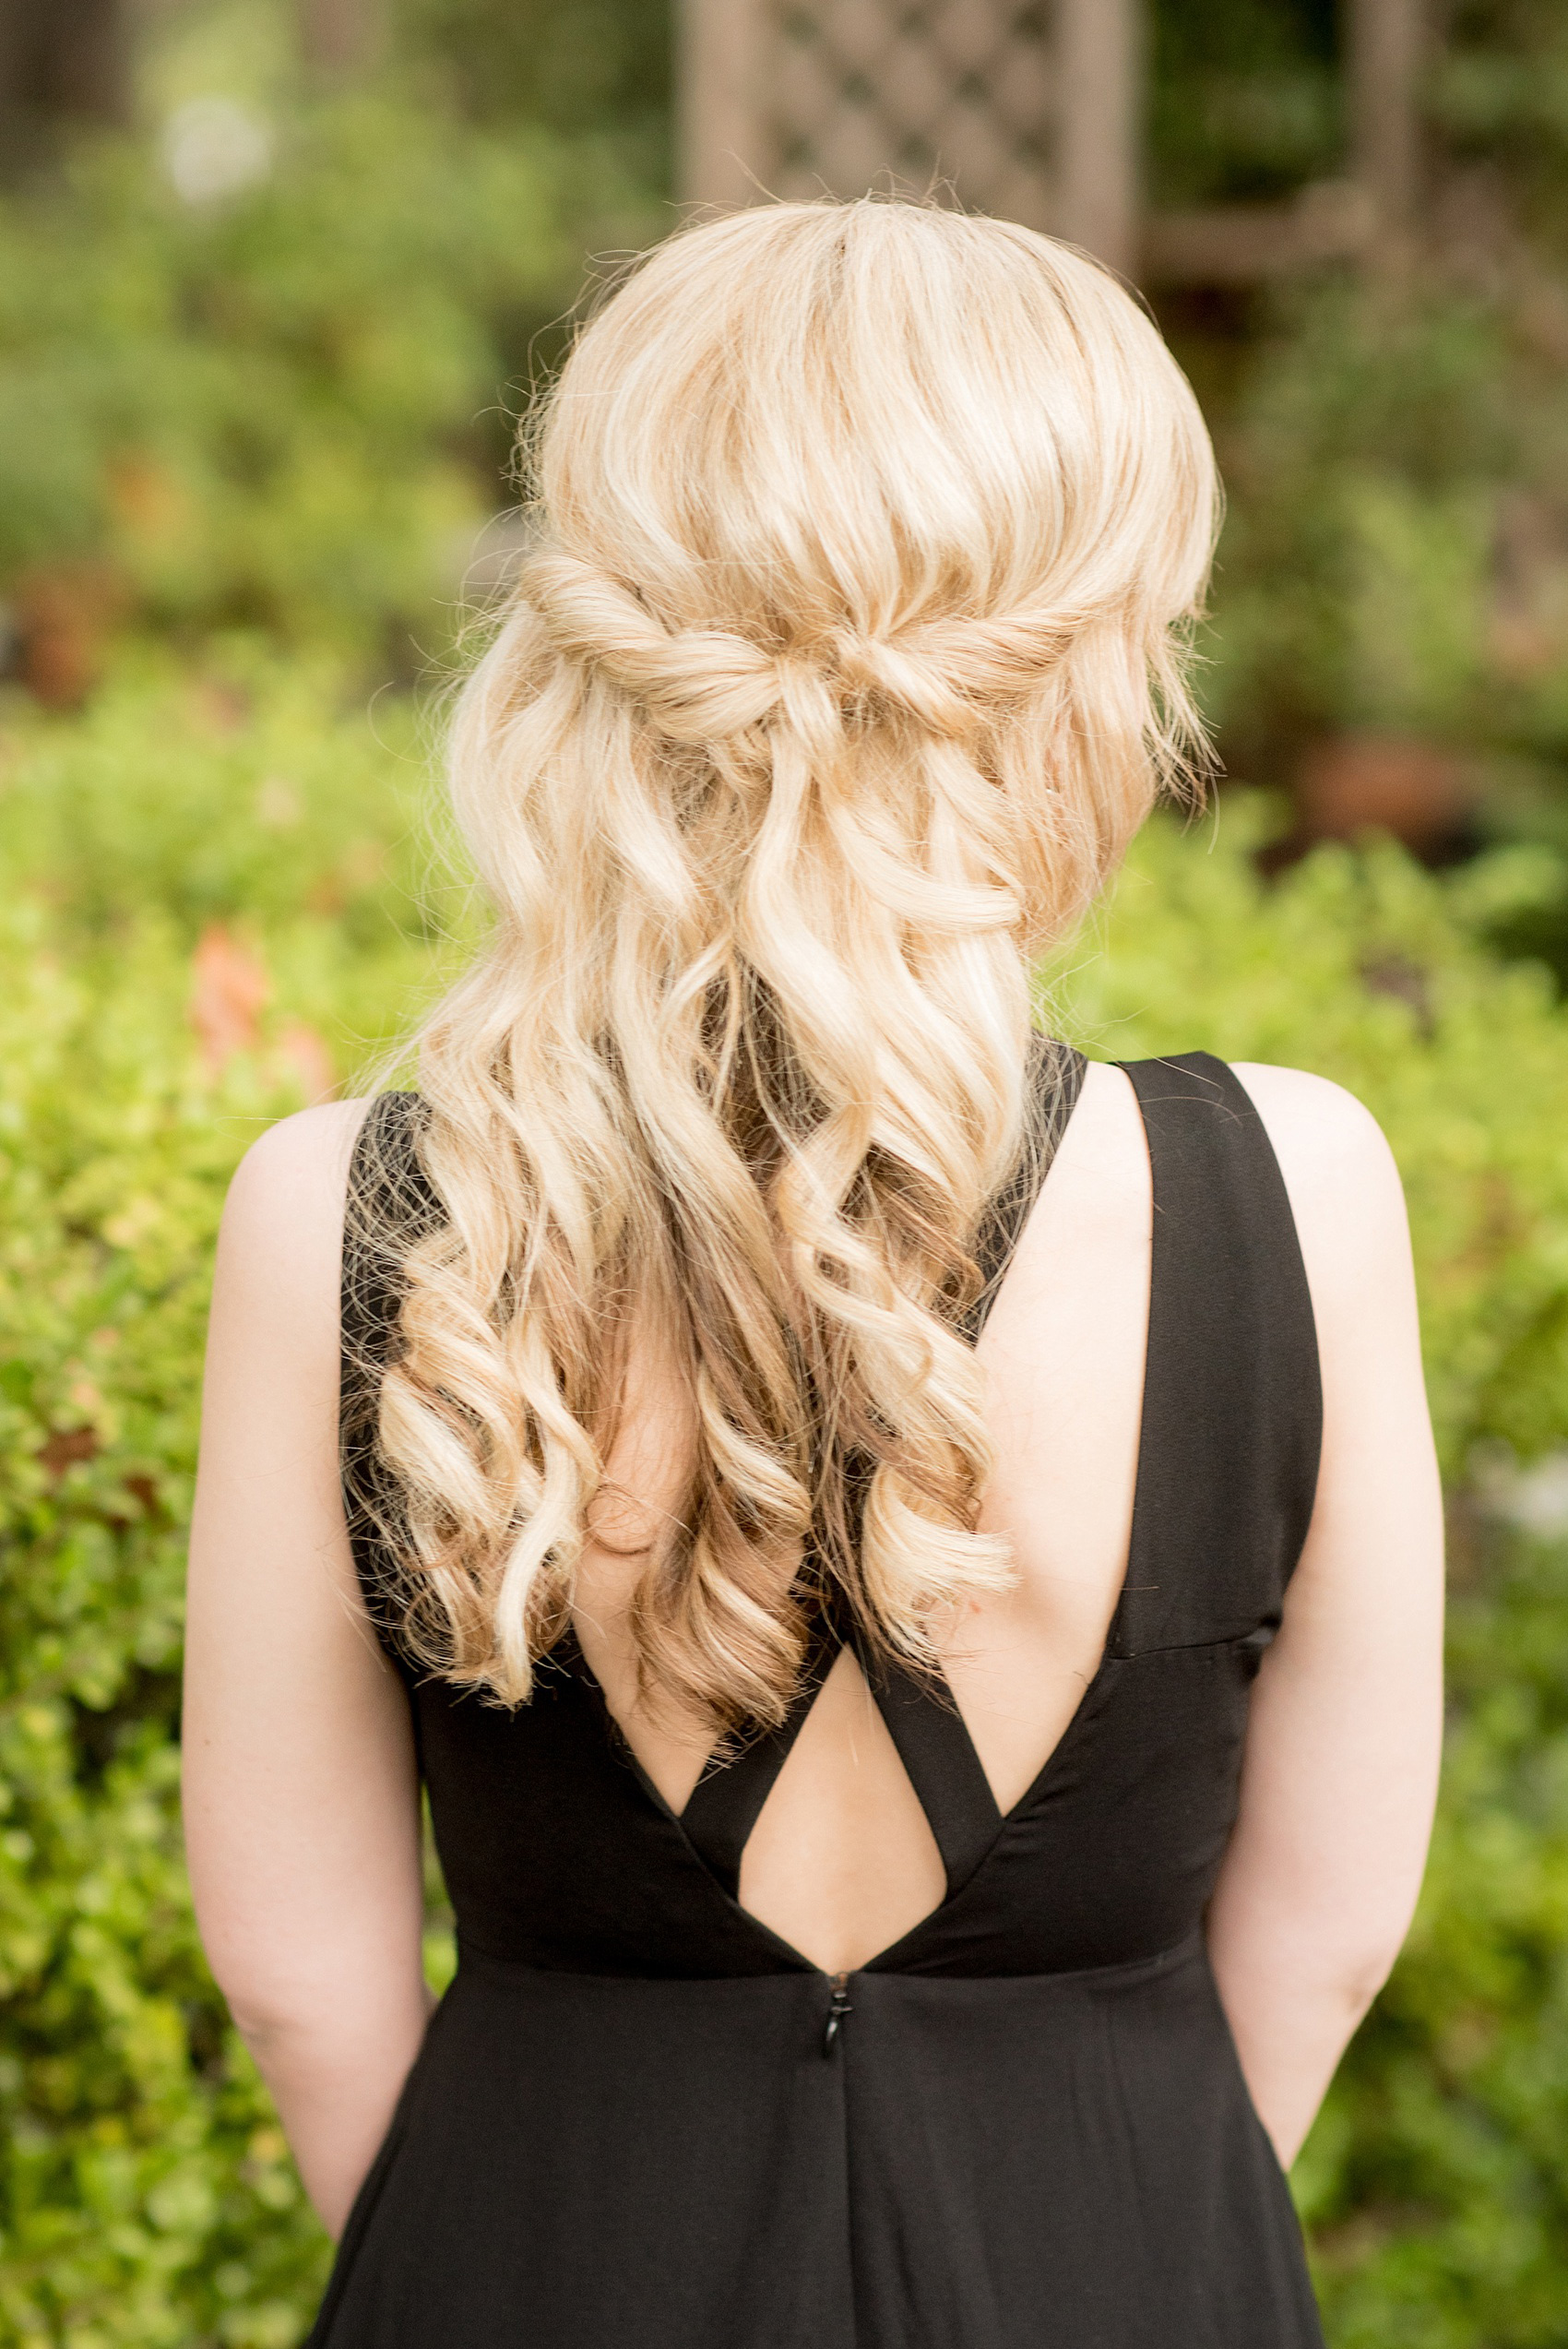 Mikkel Paige Photography photo of a bridesmaid's half up hair do by Charismatic Bride at a wedding at Testarossa Winery in Los Gatos, California.